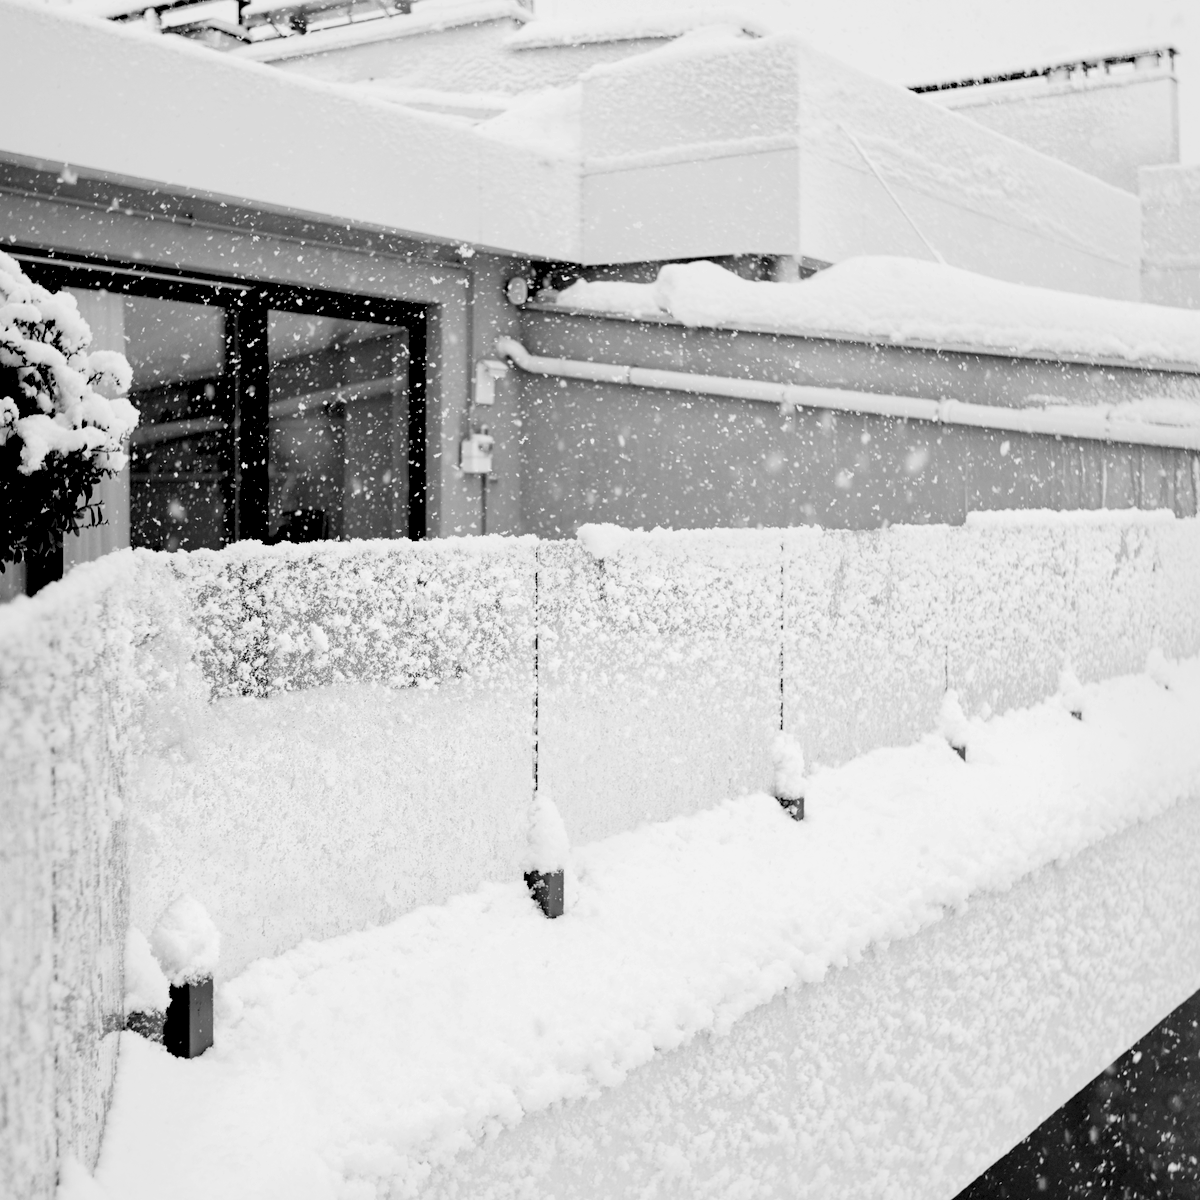 heavy snowfall on apartments in black and white